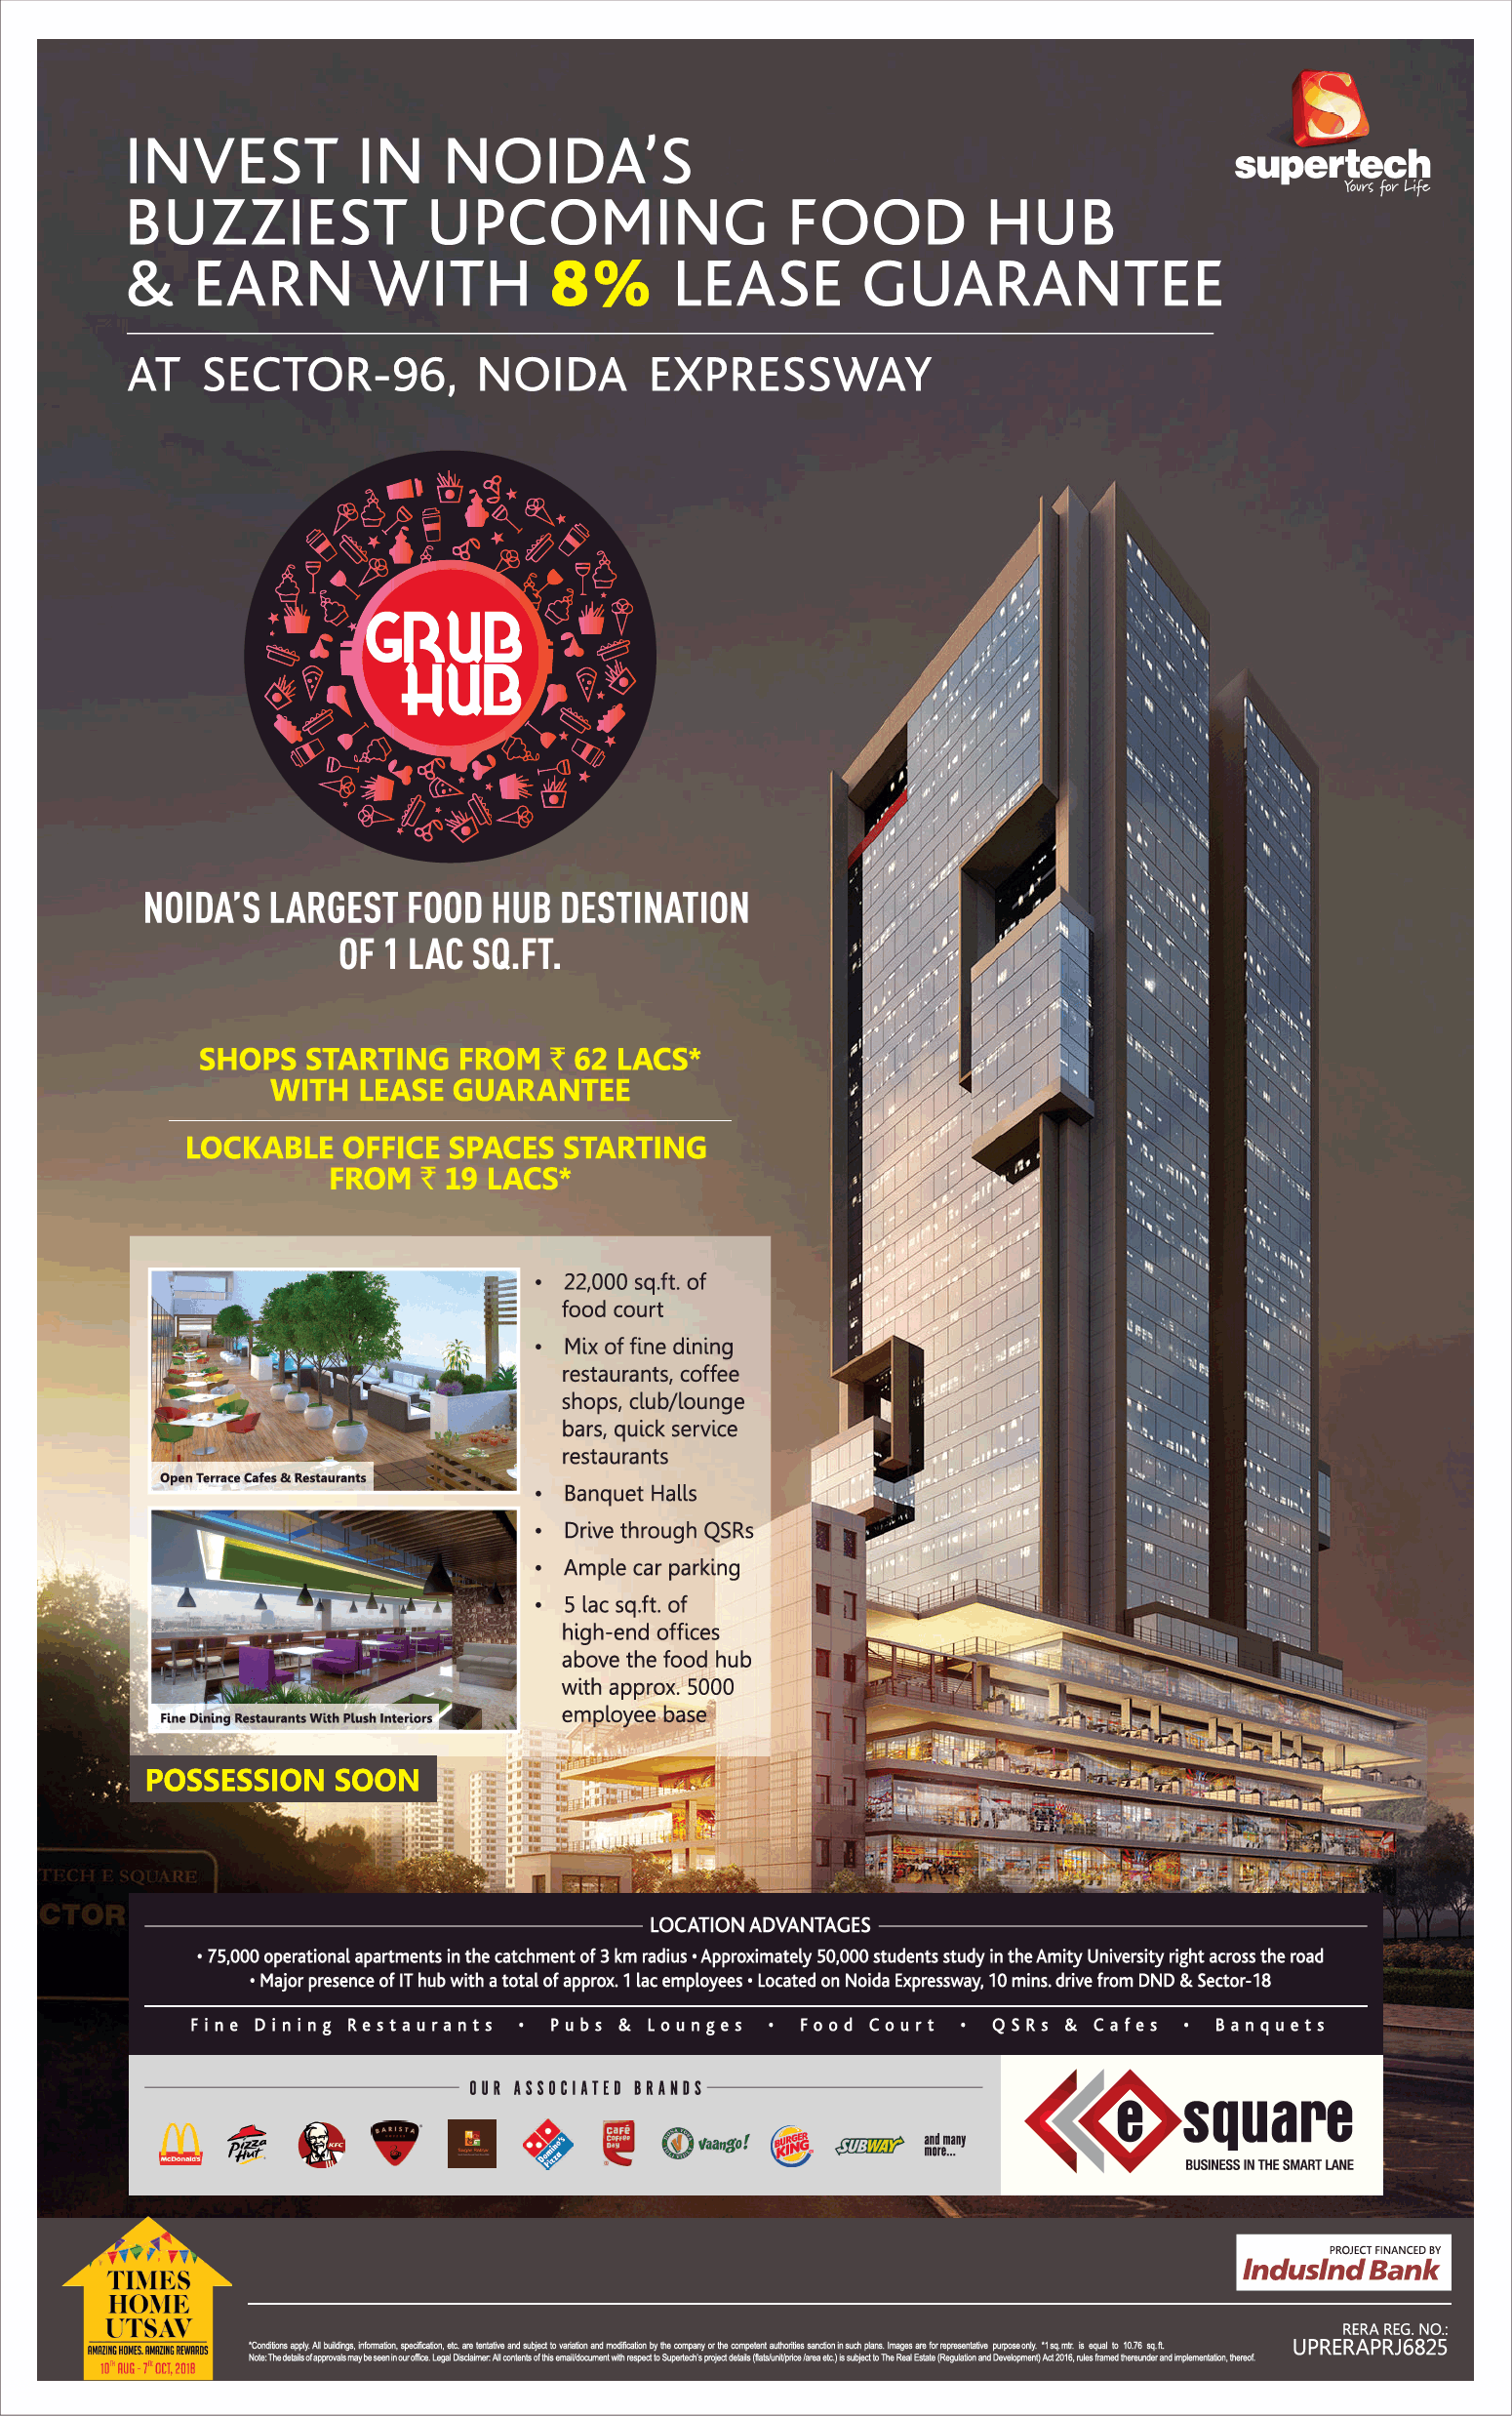 Invest in Noida's buzziest upcoming food hub & earn upto 8% lease guarantee at Supertech E Square